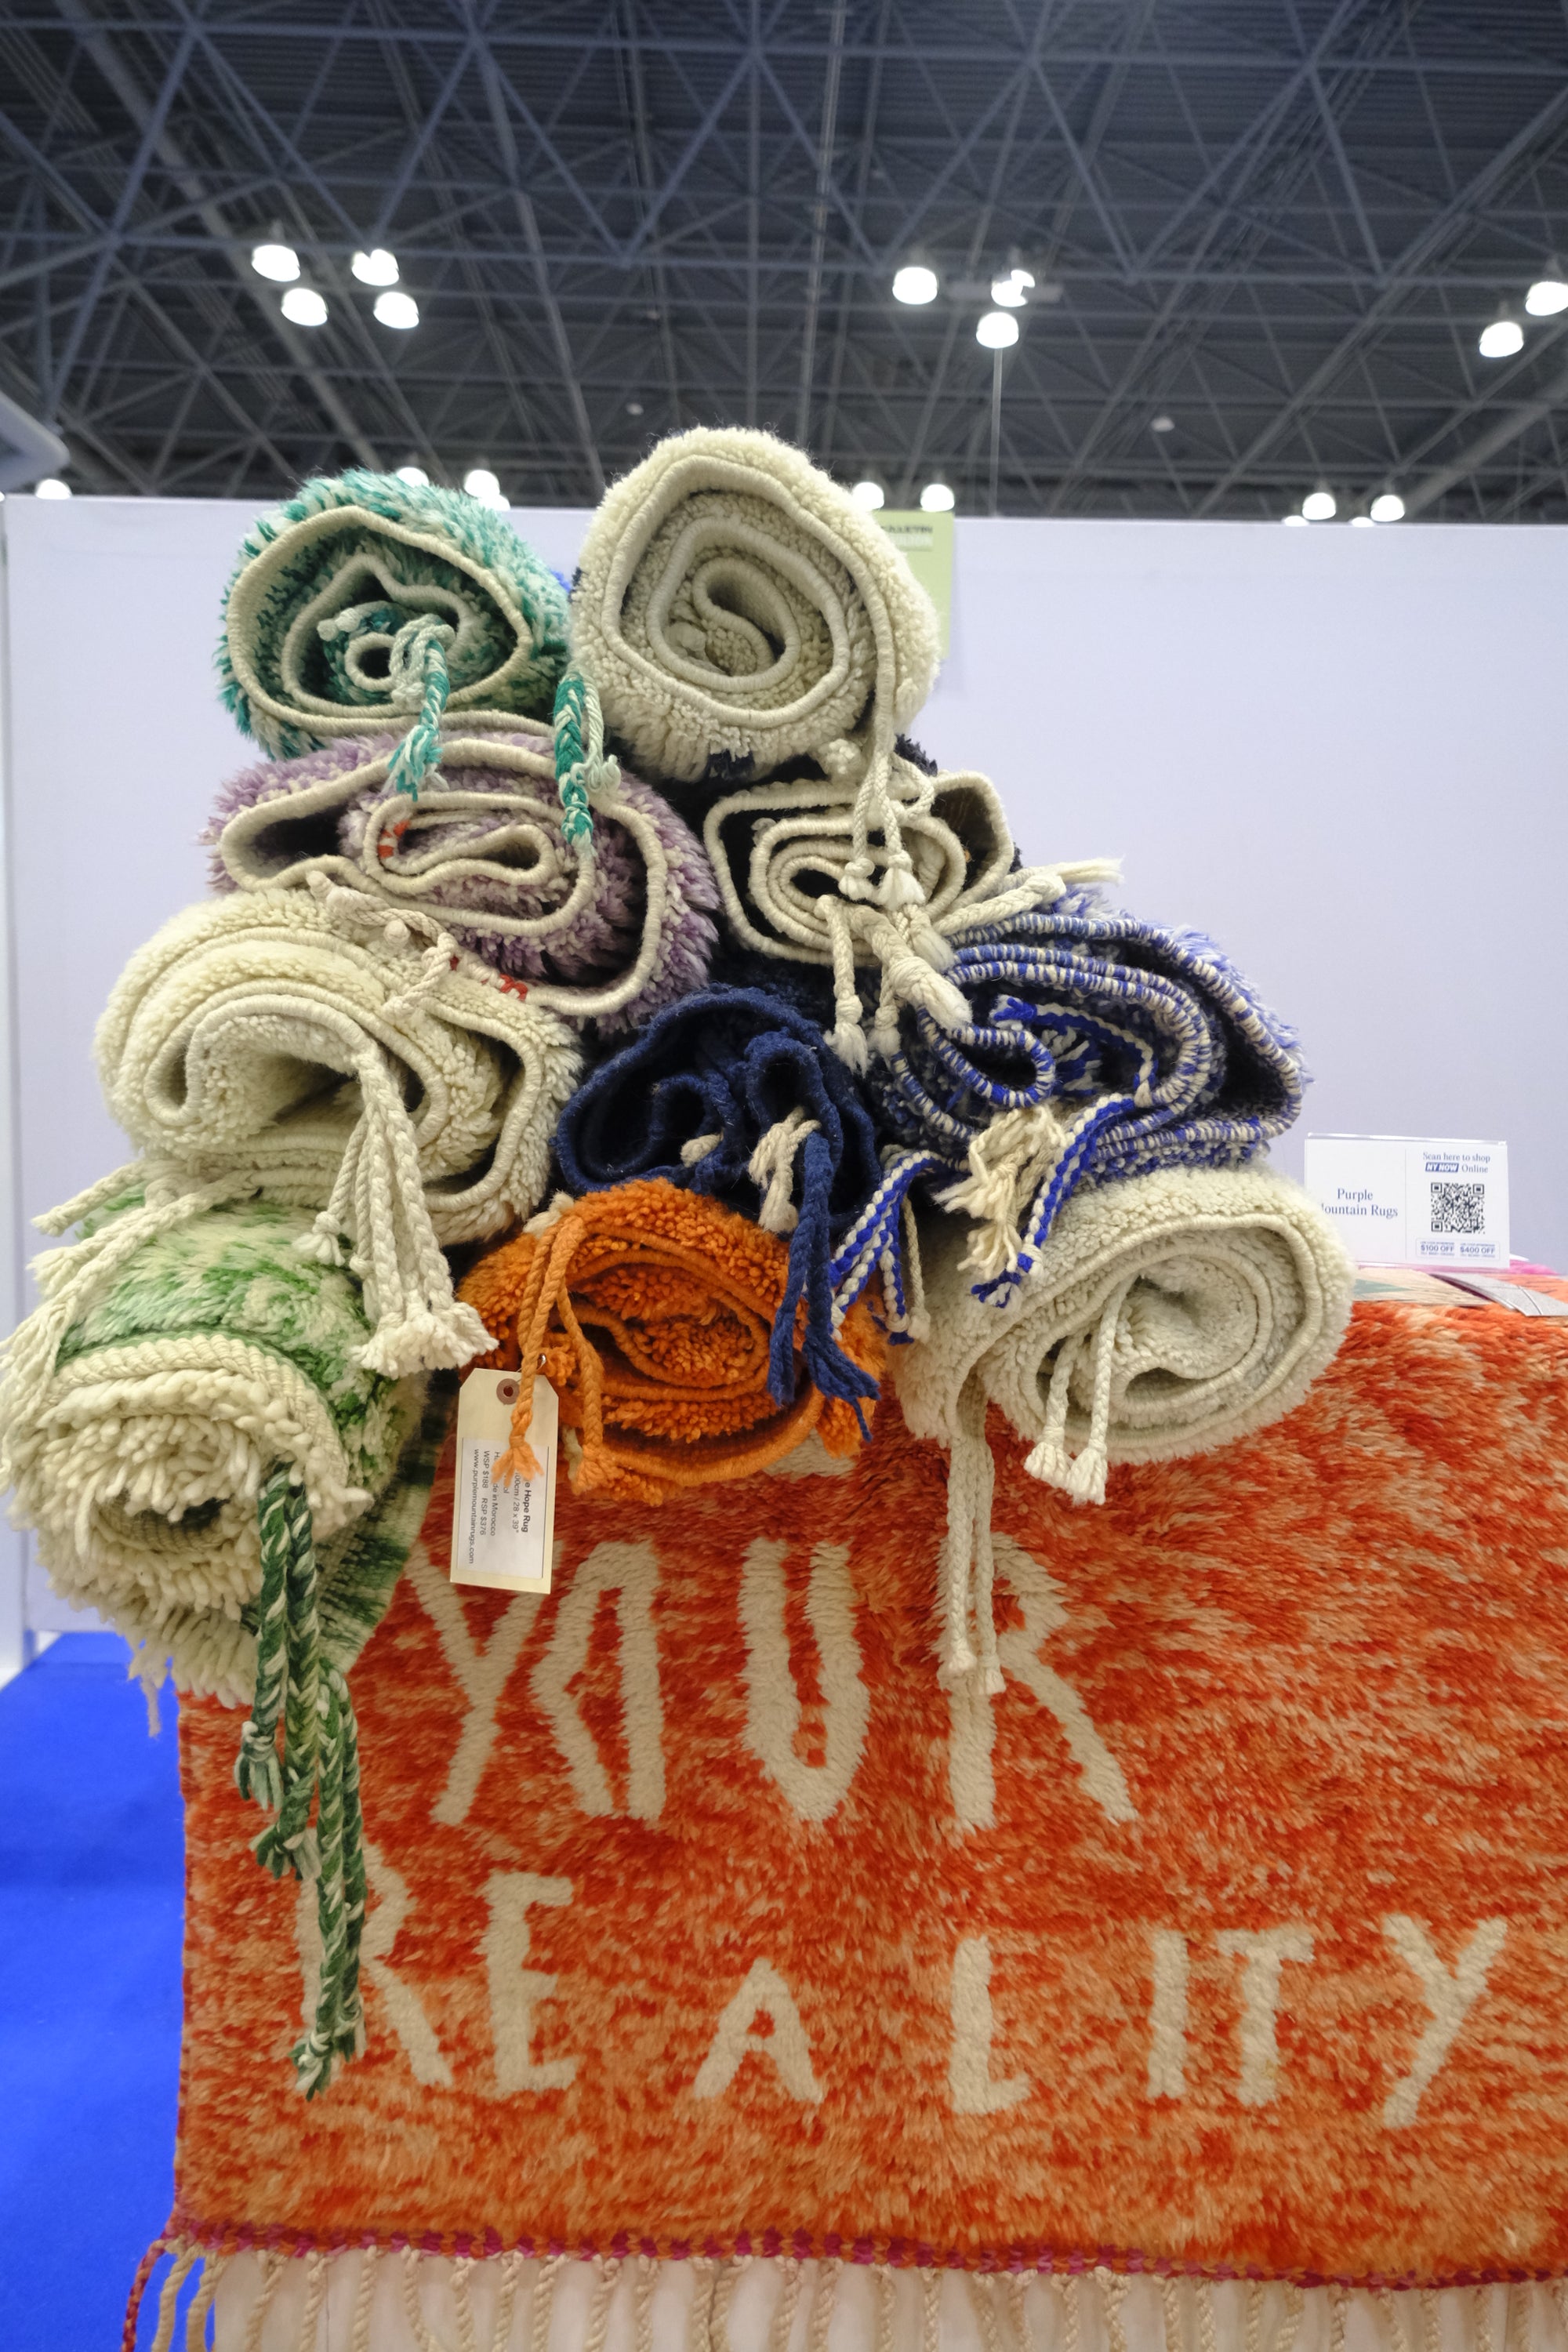 Purple Mountain Rugs, straight outta Brooklyn, landed at NY NOW in the grand halls of Javits Center. We were part of the Bulletin Exhibits, weaving together modern design and traditional craftsmanship.